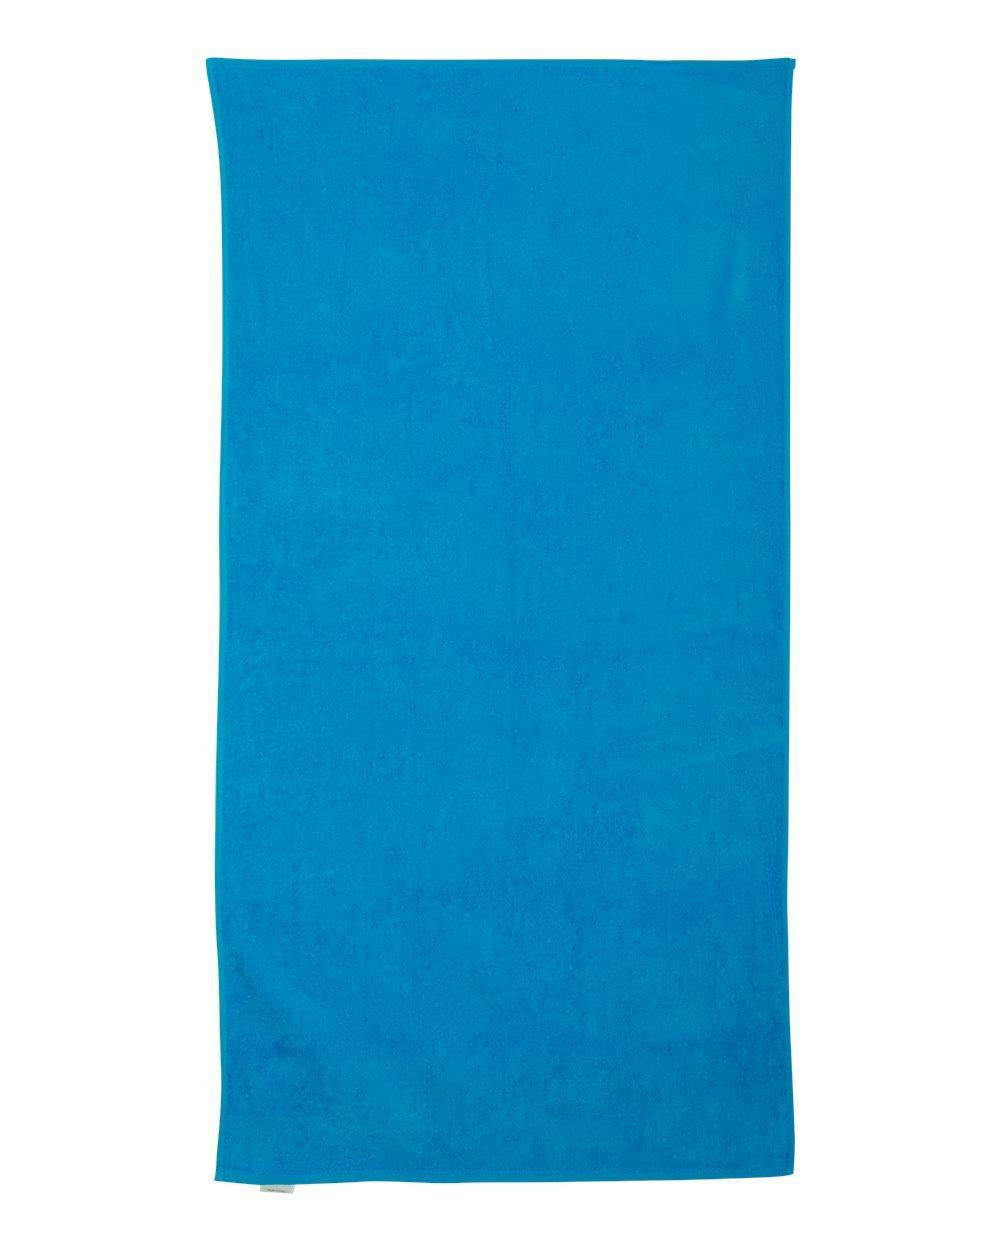 Image for Value Beach Towel - OAD3060